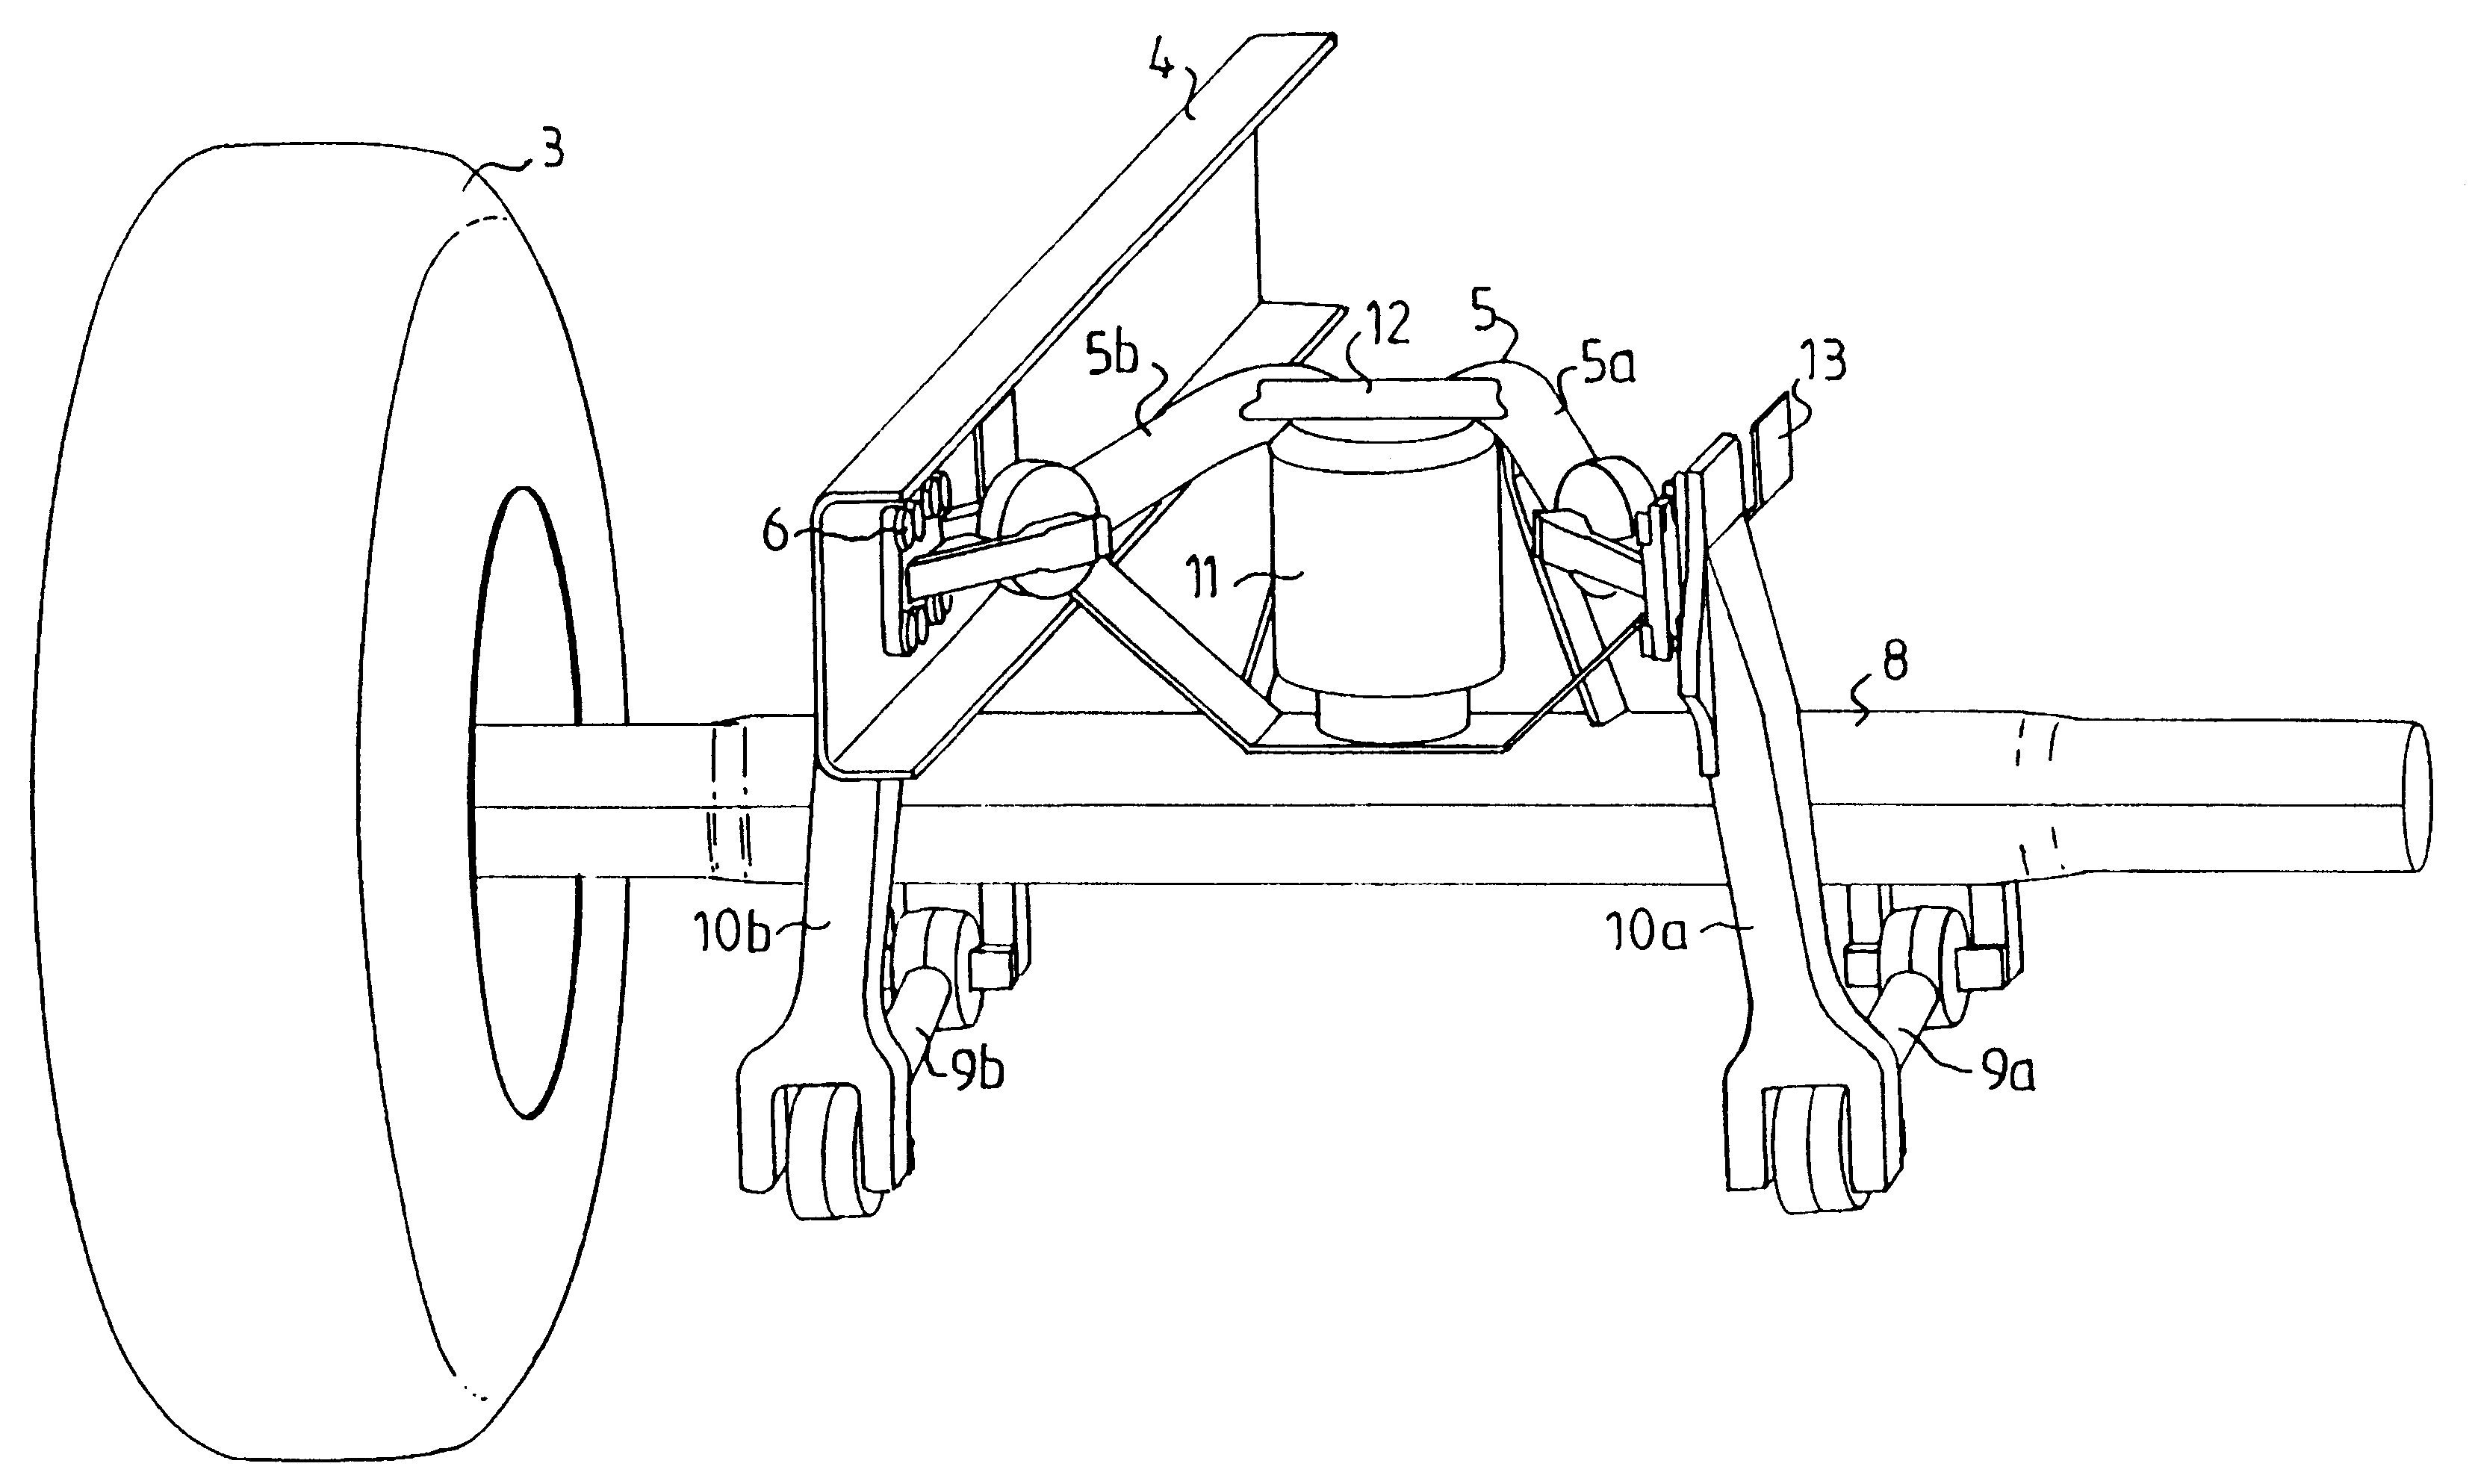 Axle lifting device for a vehicle